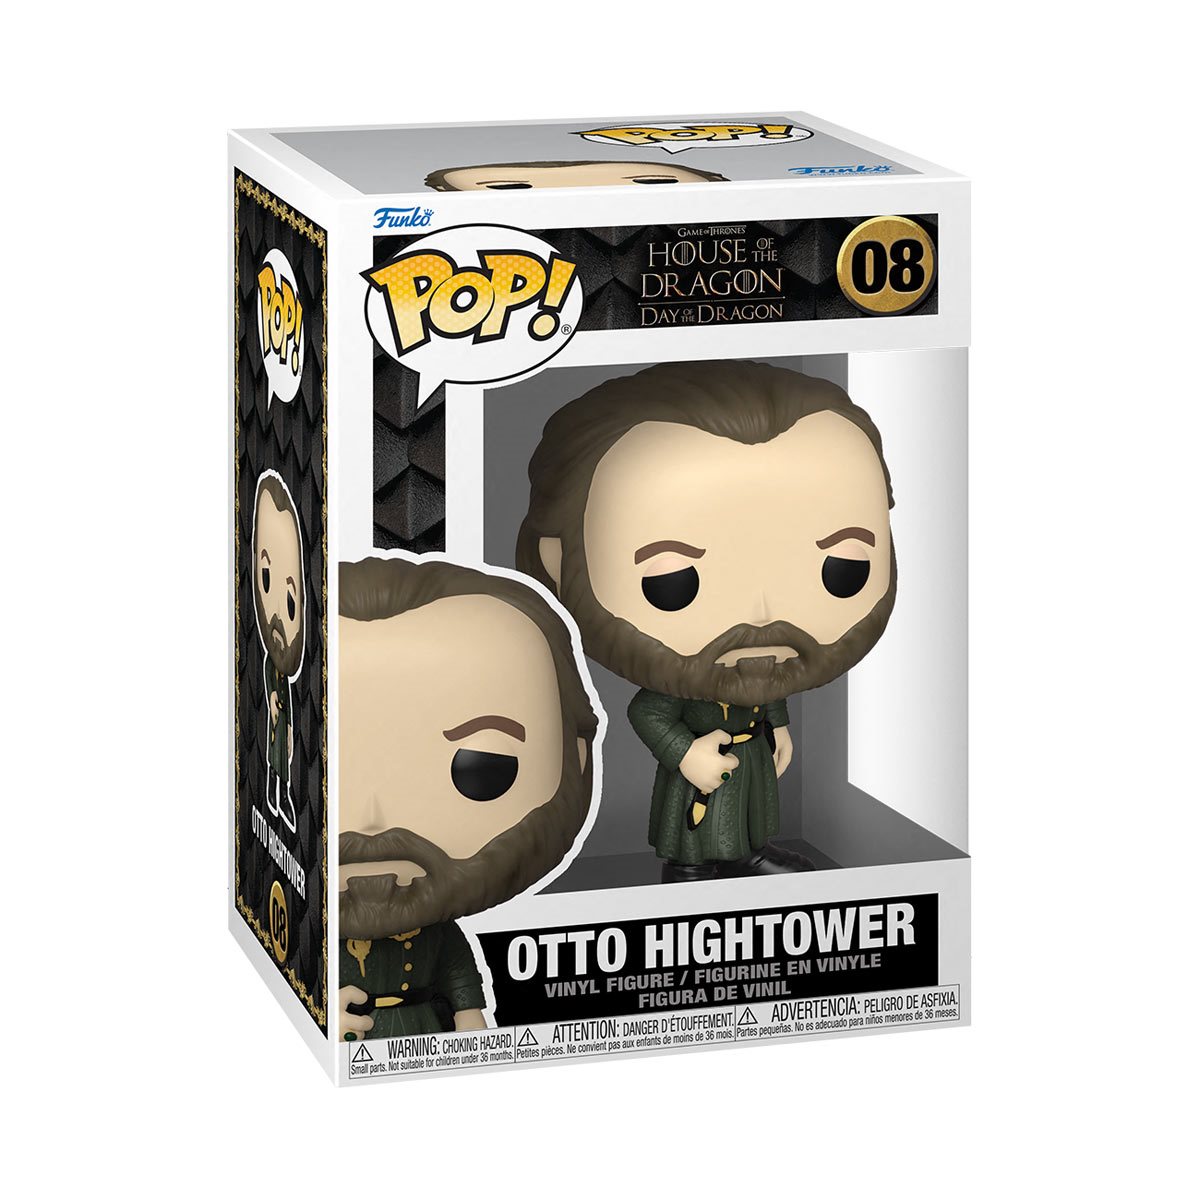 Otto Hightower House of the Dragon Pop!